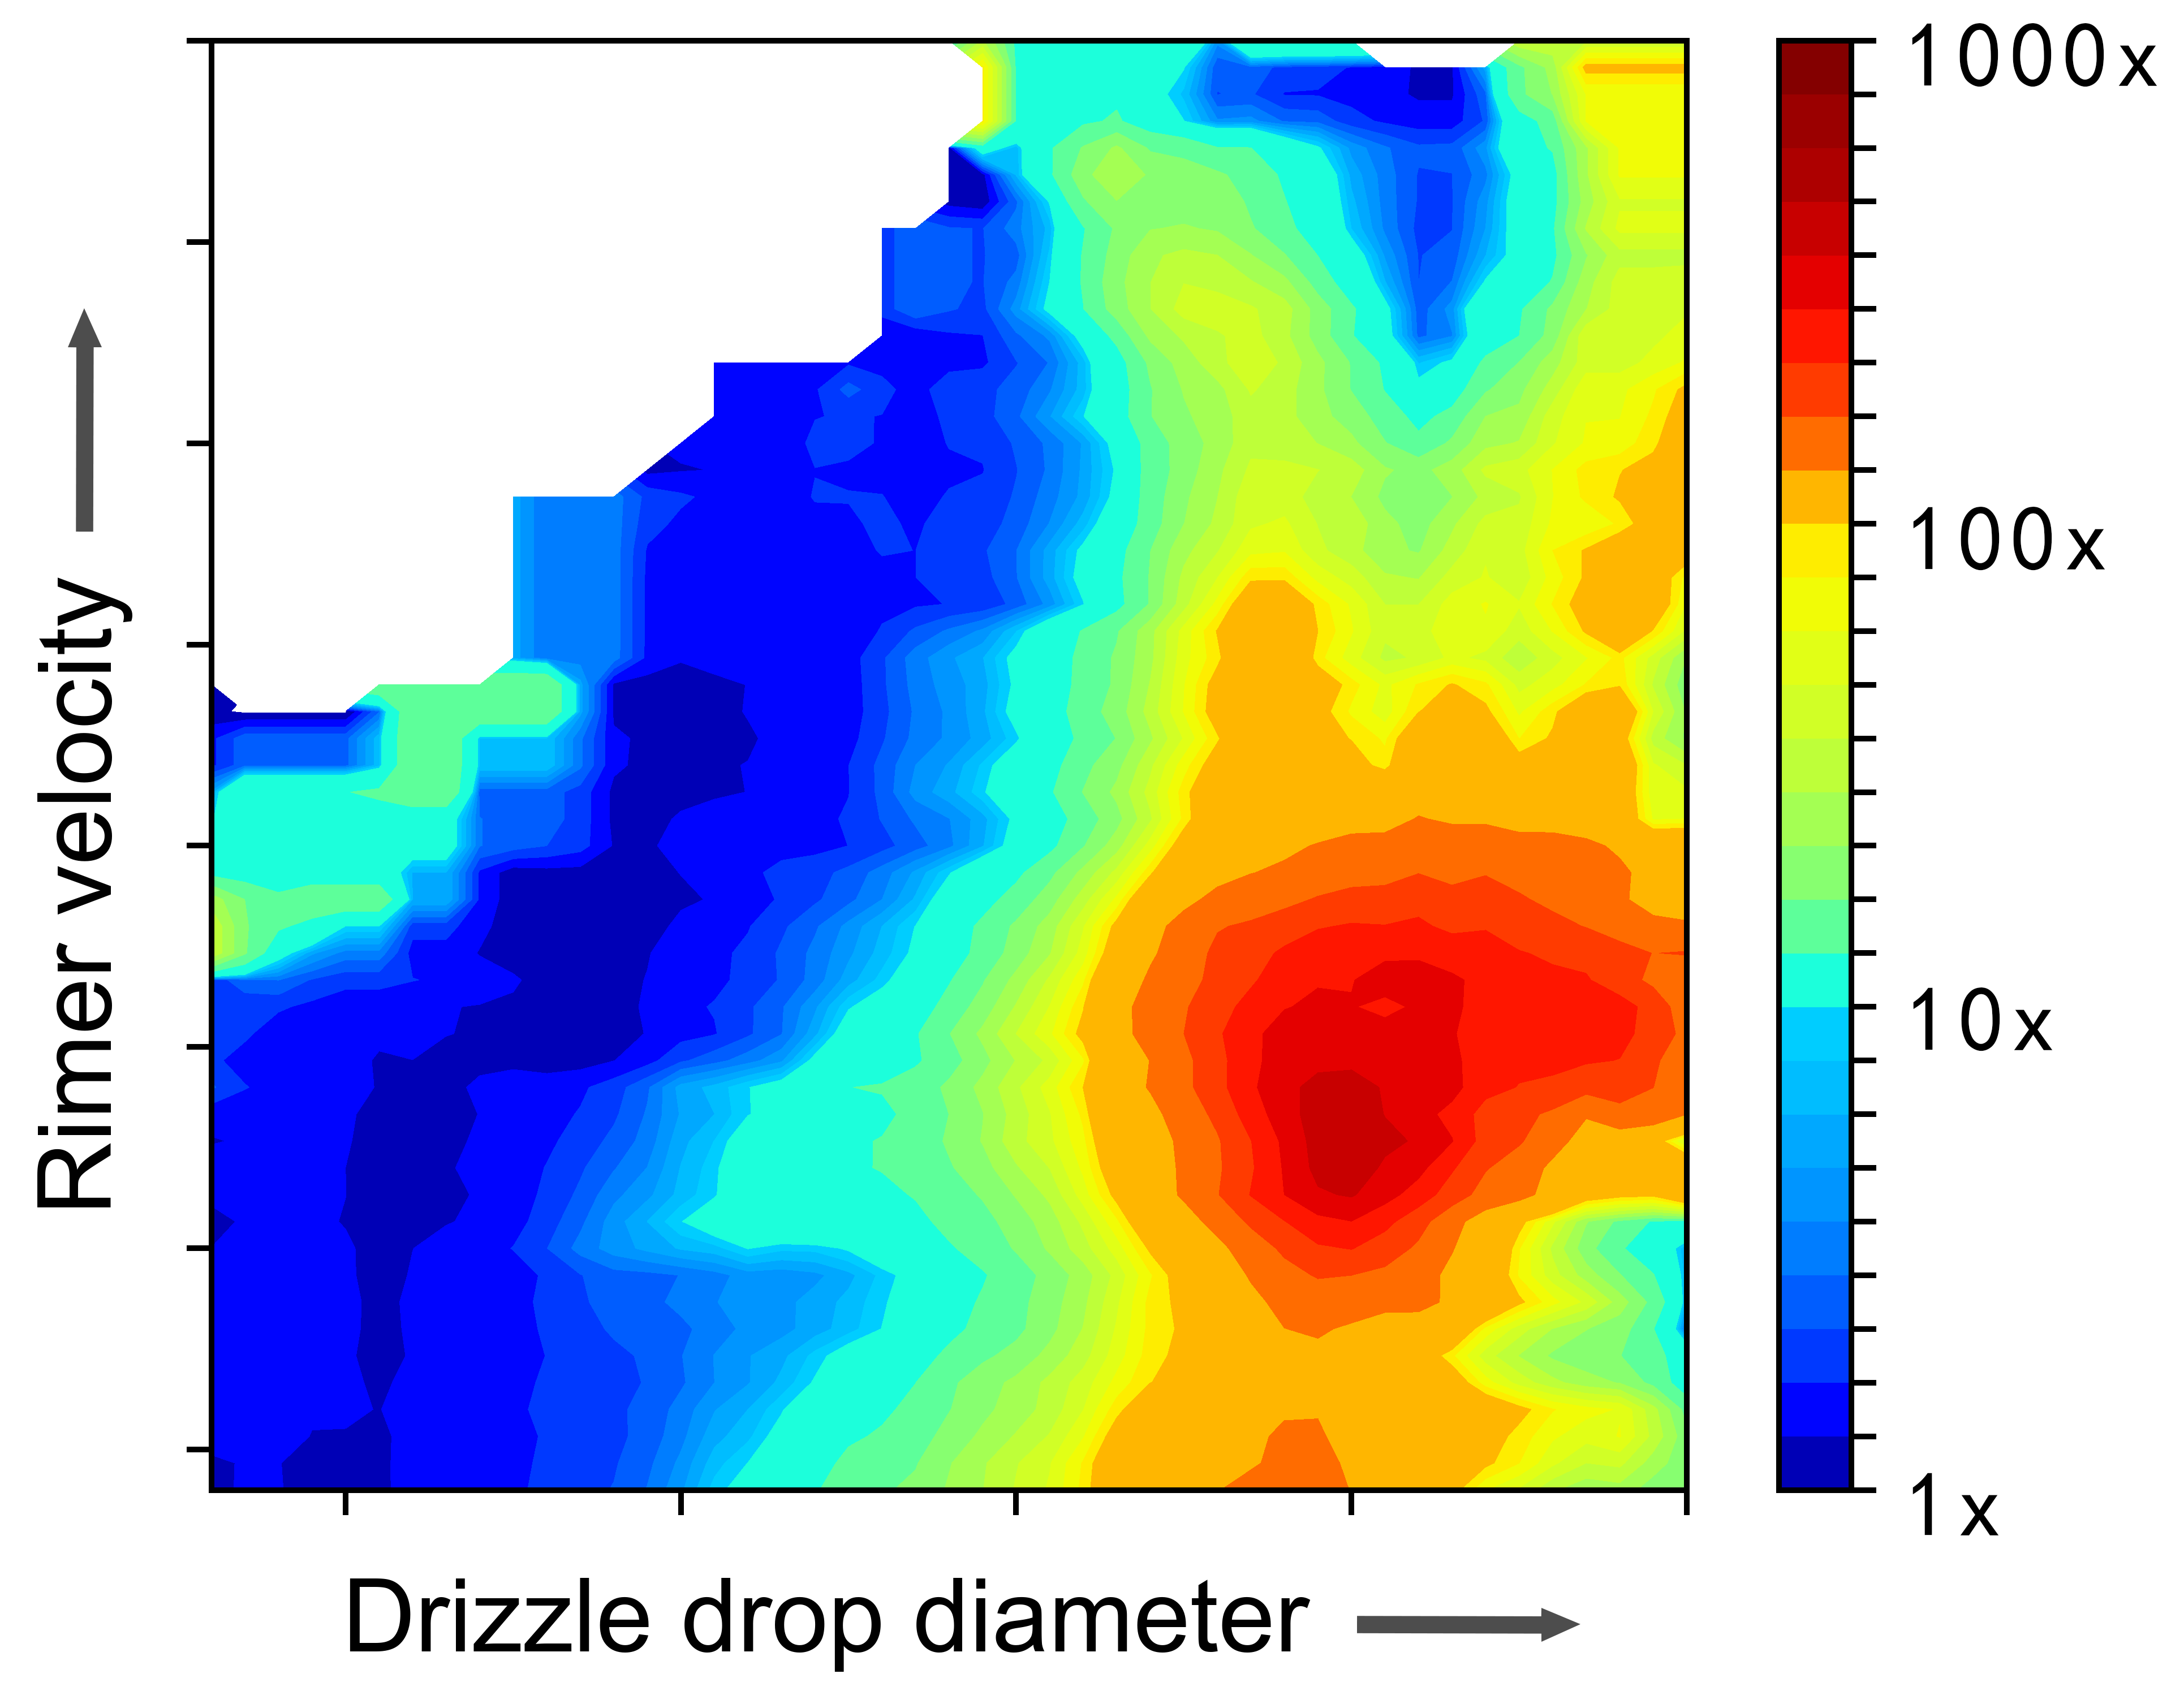 This graph shows how the amount of ice multiplication in clouds is affected by fast-falling “rimer” ice particle velocity and drizzle drop size. Red on the rainbow scale represents the highest amounts of secondary ice particles being generated. The skewing of the ice multiplication amounts to the right side of the graph indicates that drizzle drop diameter plays a more significant role than rimer velocity in generating ice multiplication.